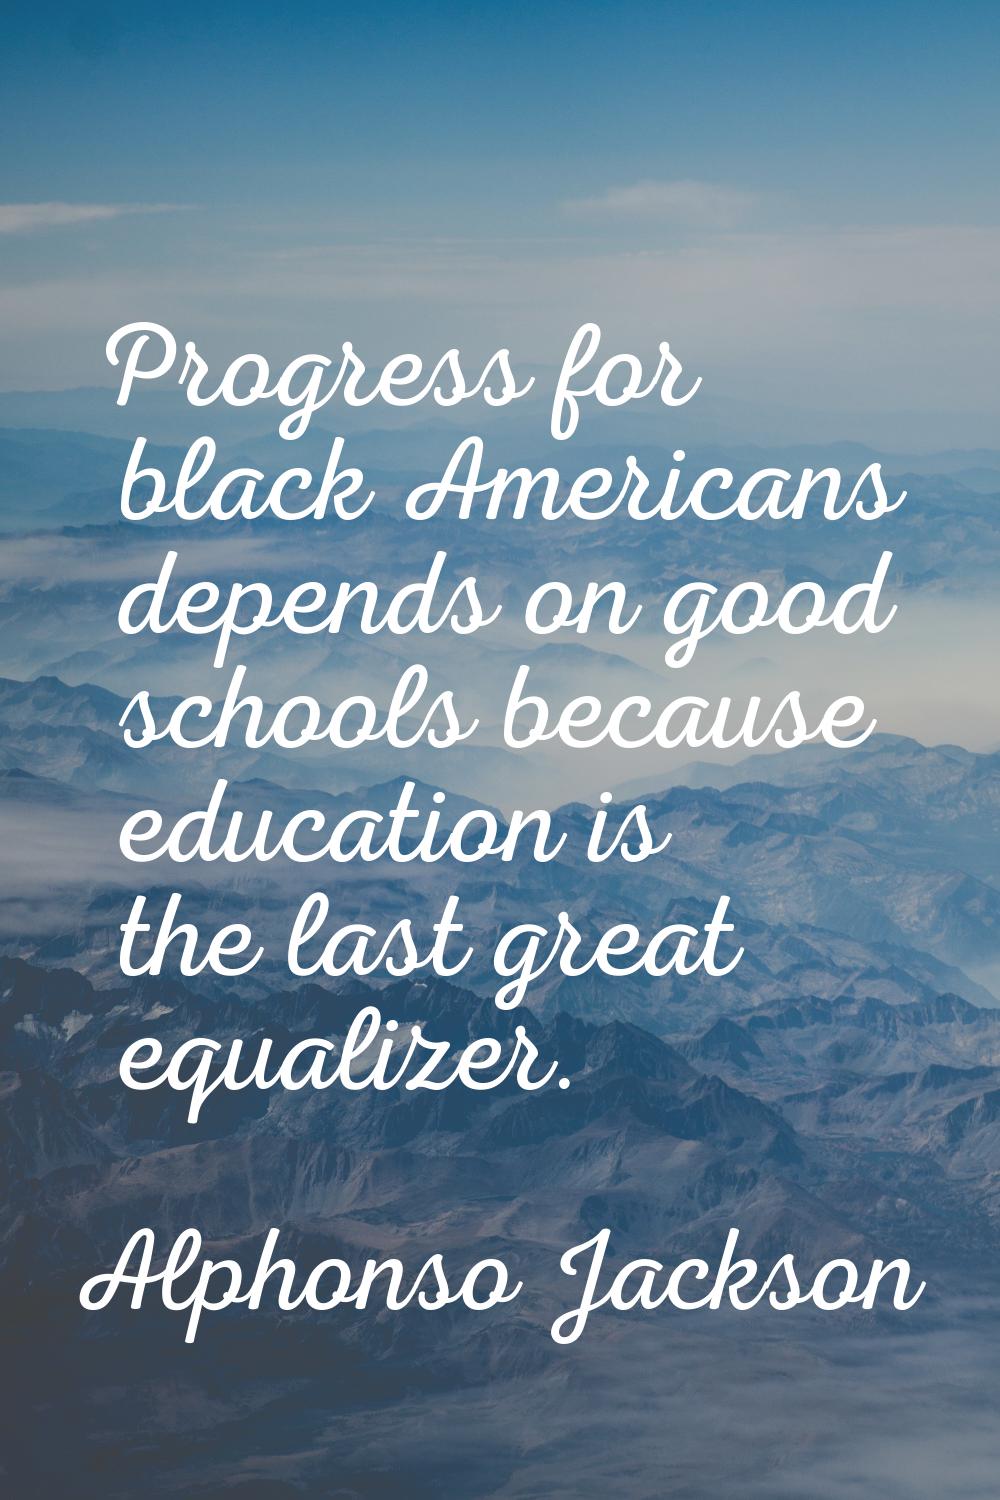 Progress for black Americans depends on good schools because education is the last great equalizer.